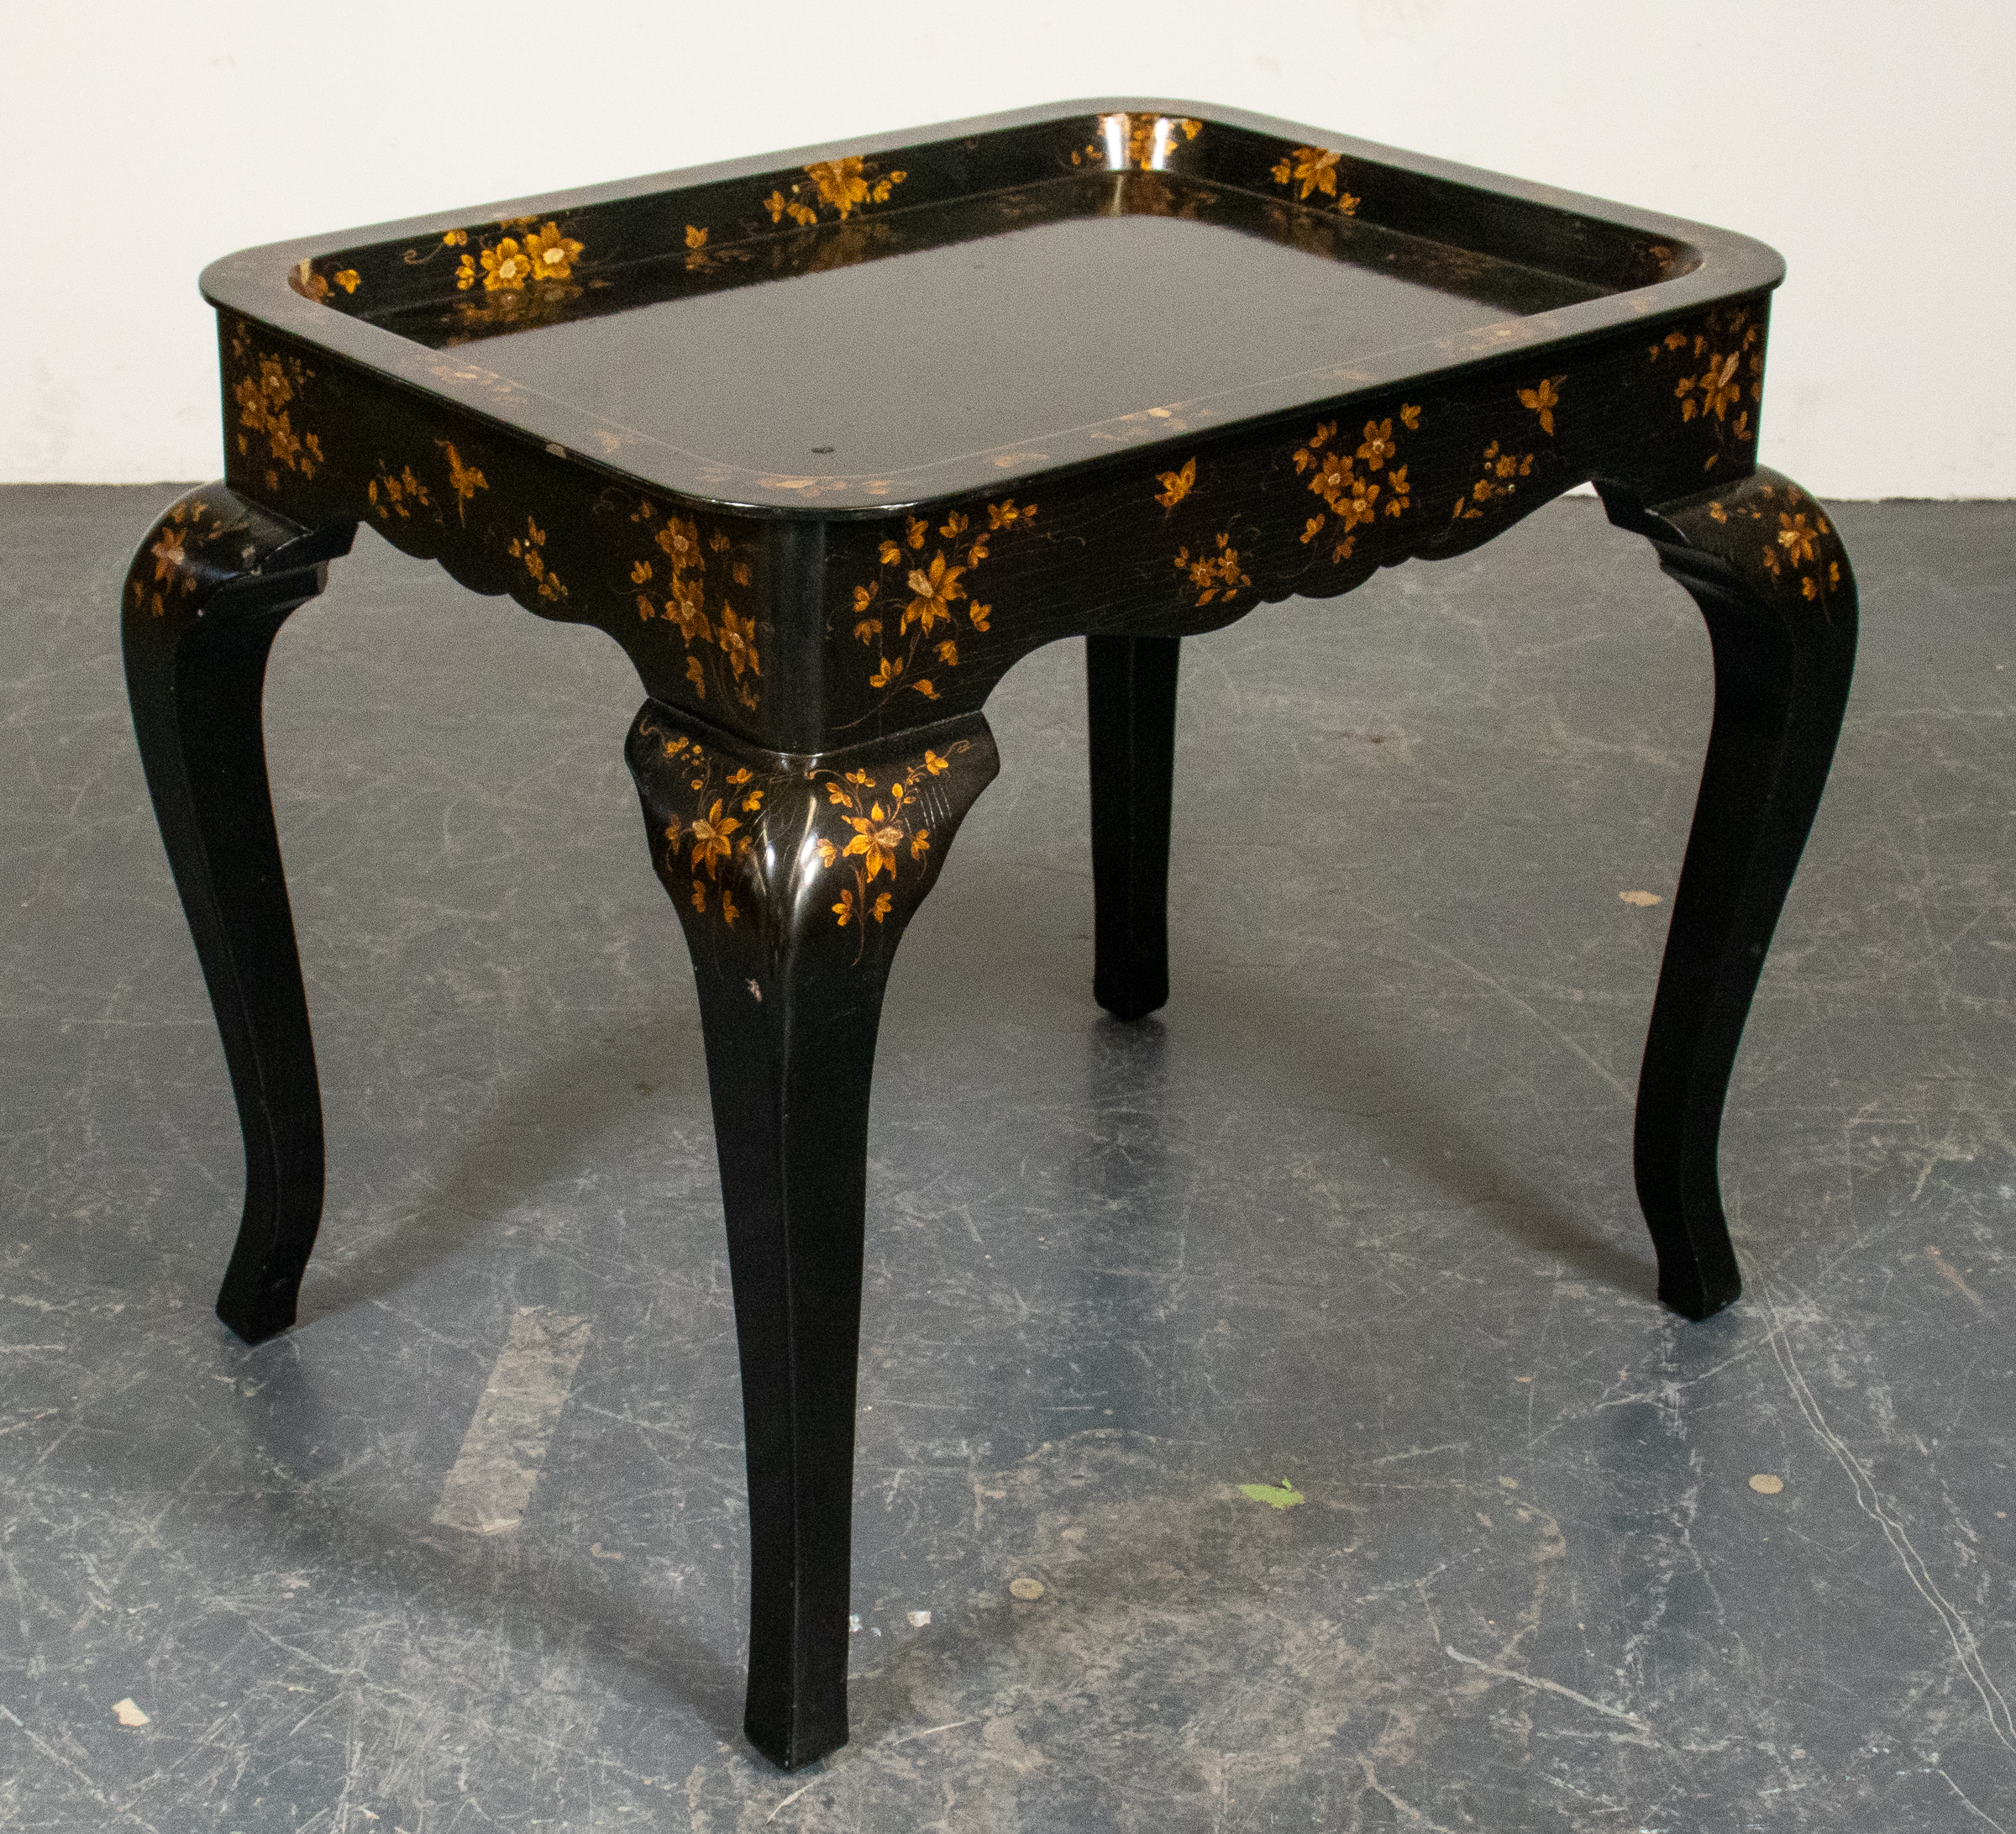 ROCOCO STYLE PAINT DECORATED EBONIZED 3c34a6